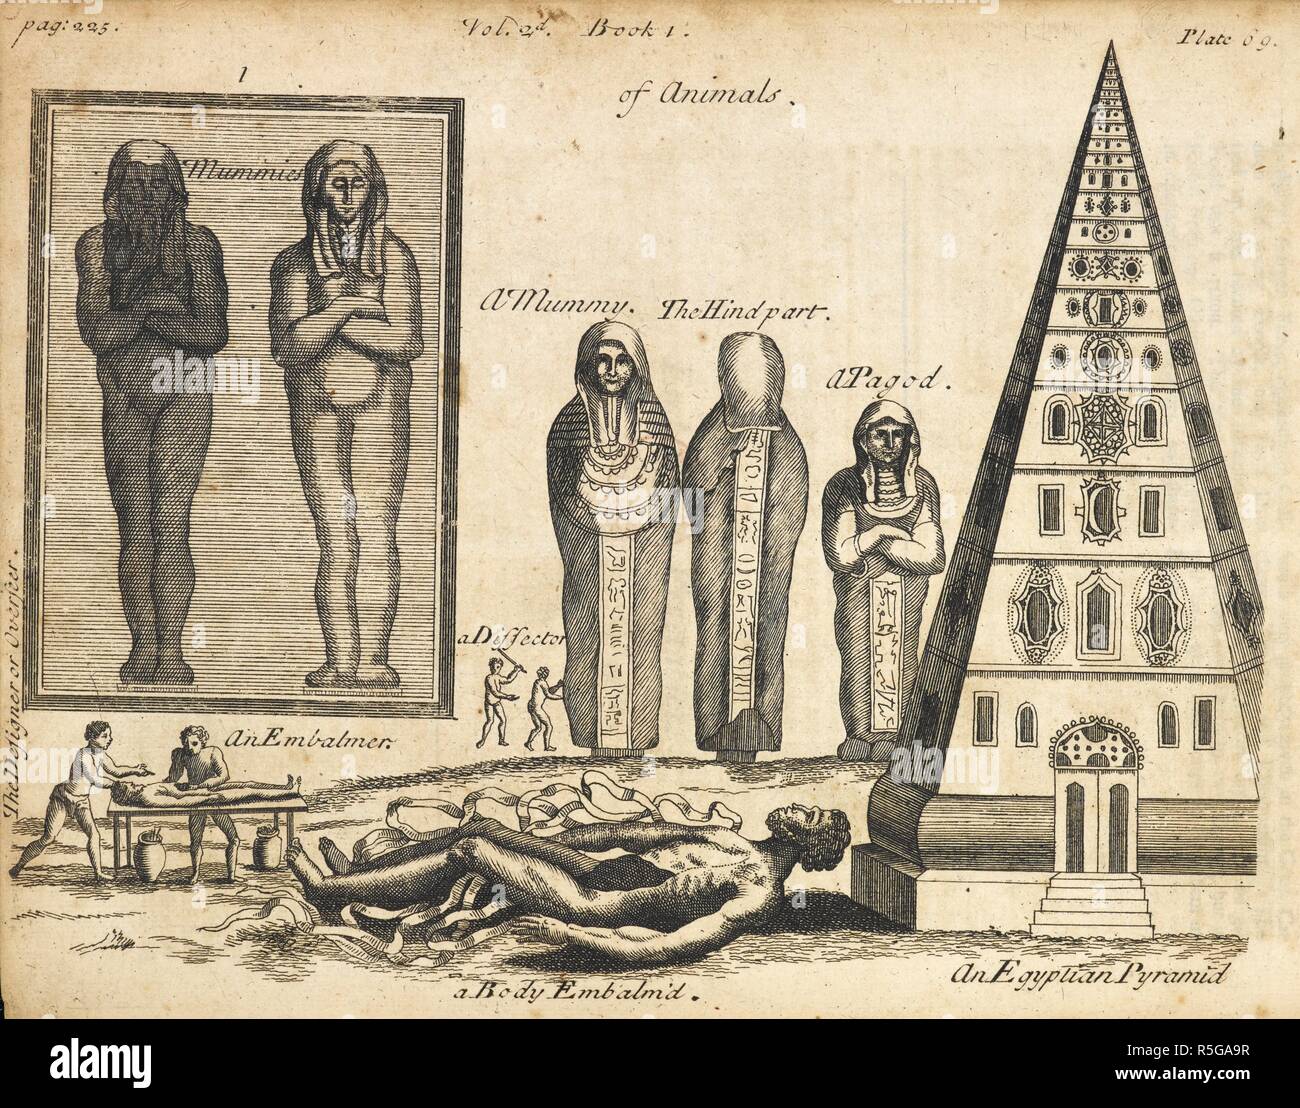 An illustration of mummies, an embalmed body and an Egyptian pyramid. A Compleat History of Druggs ... The second edition. London, 1737. Source: 7509.e.19, plate 69. Language: English. Author: Pomet, Pierre. Stock Photo